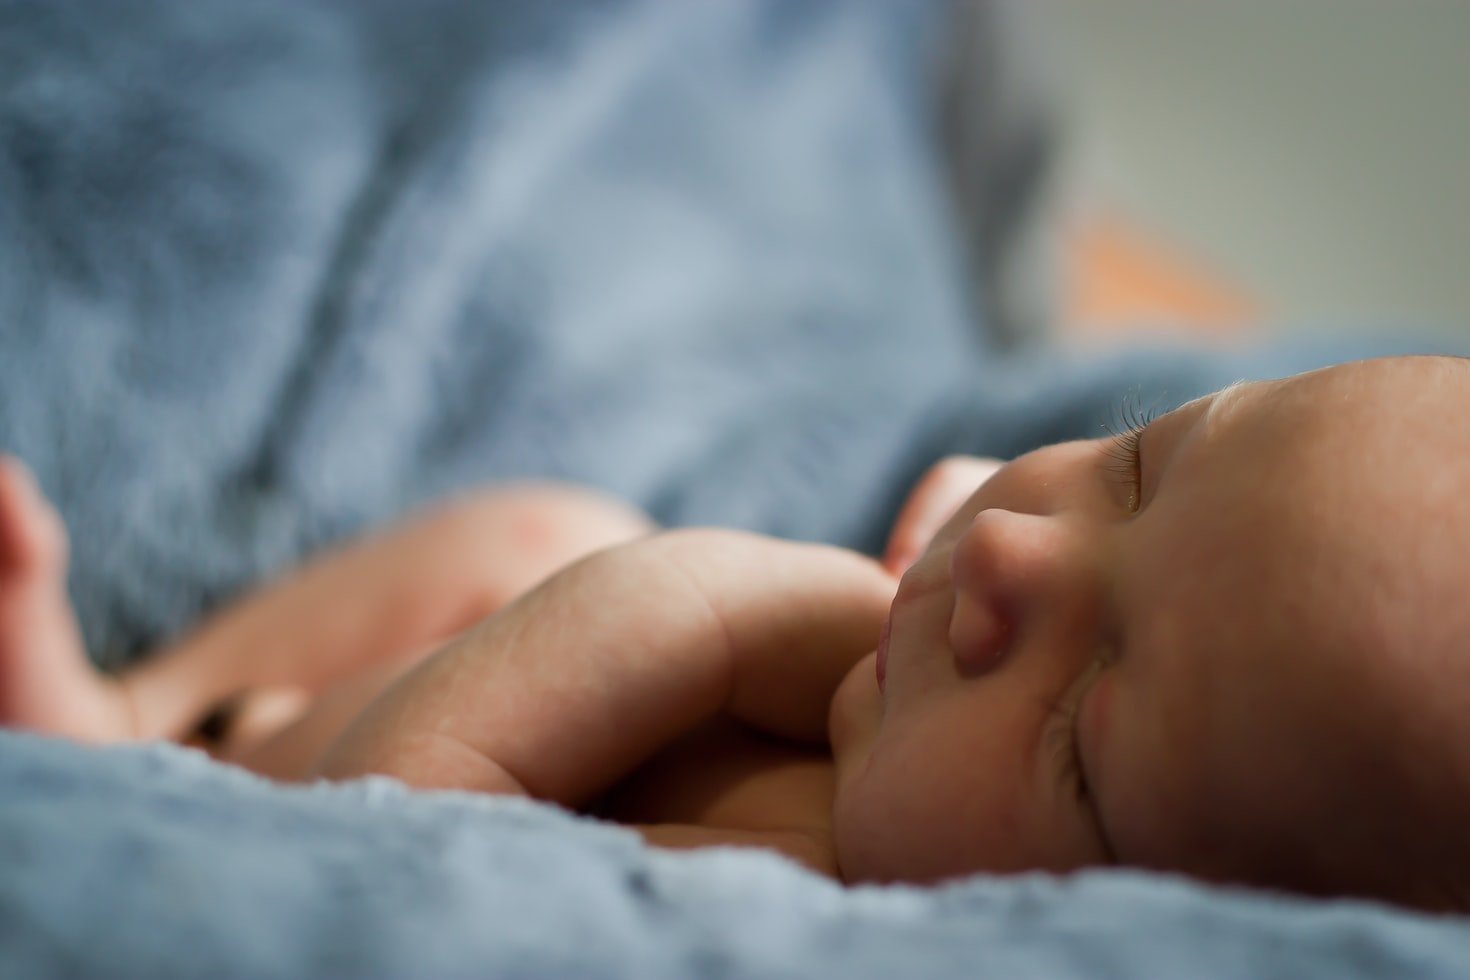 John was carefully wrapped in a soft baby-blue blanket | Source: Unsplash